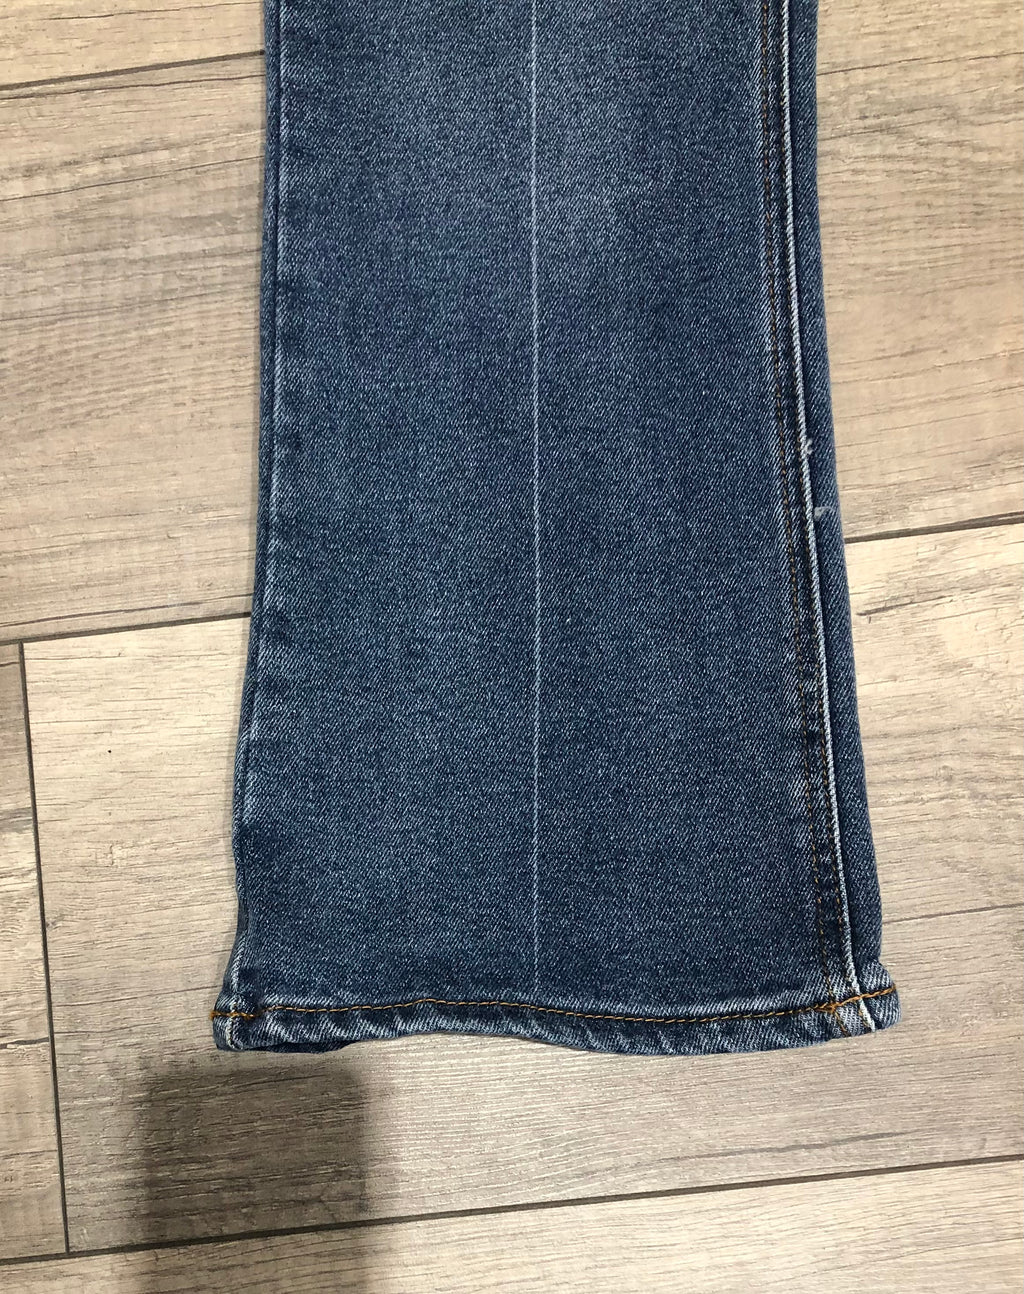 Alina Mid Rise Jeans